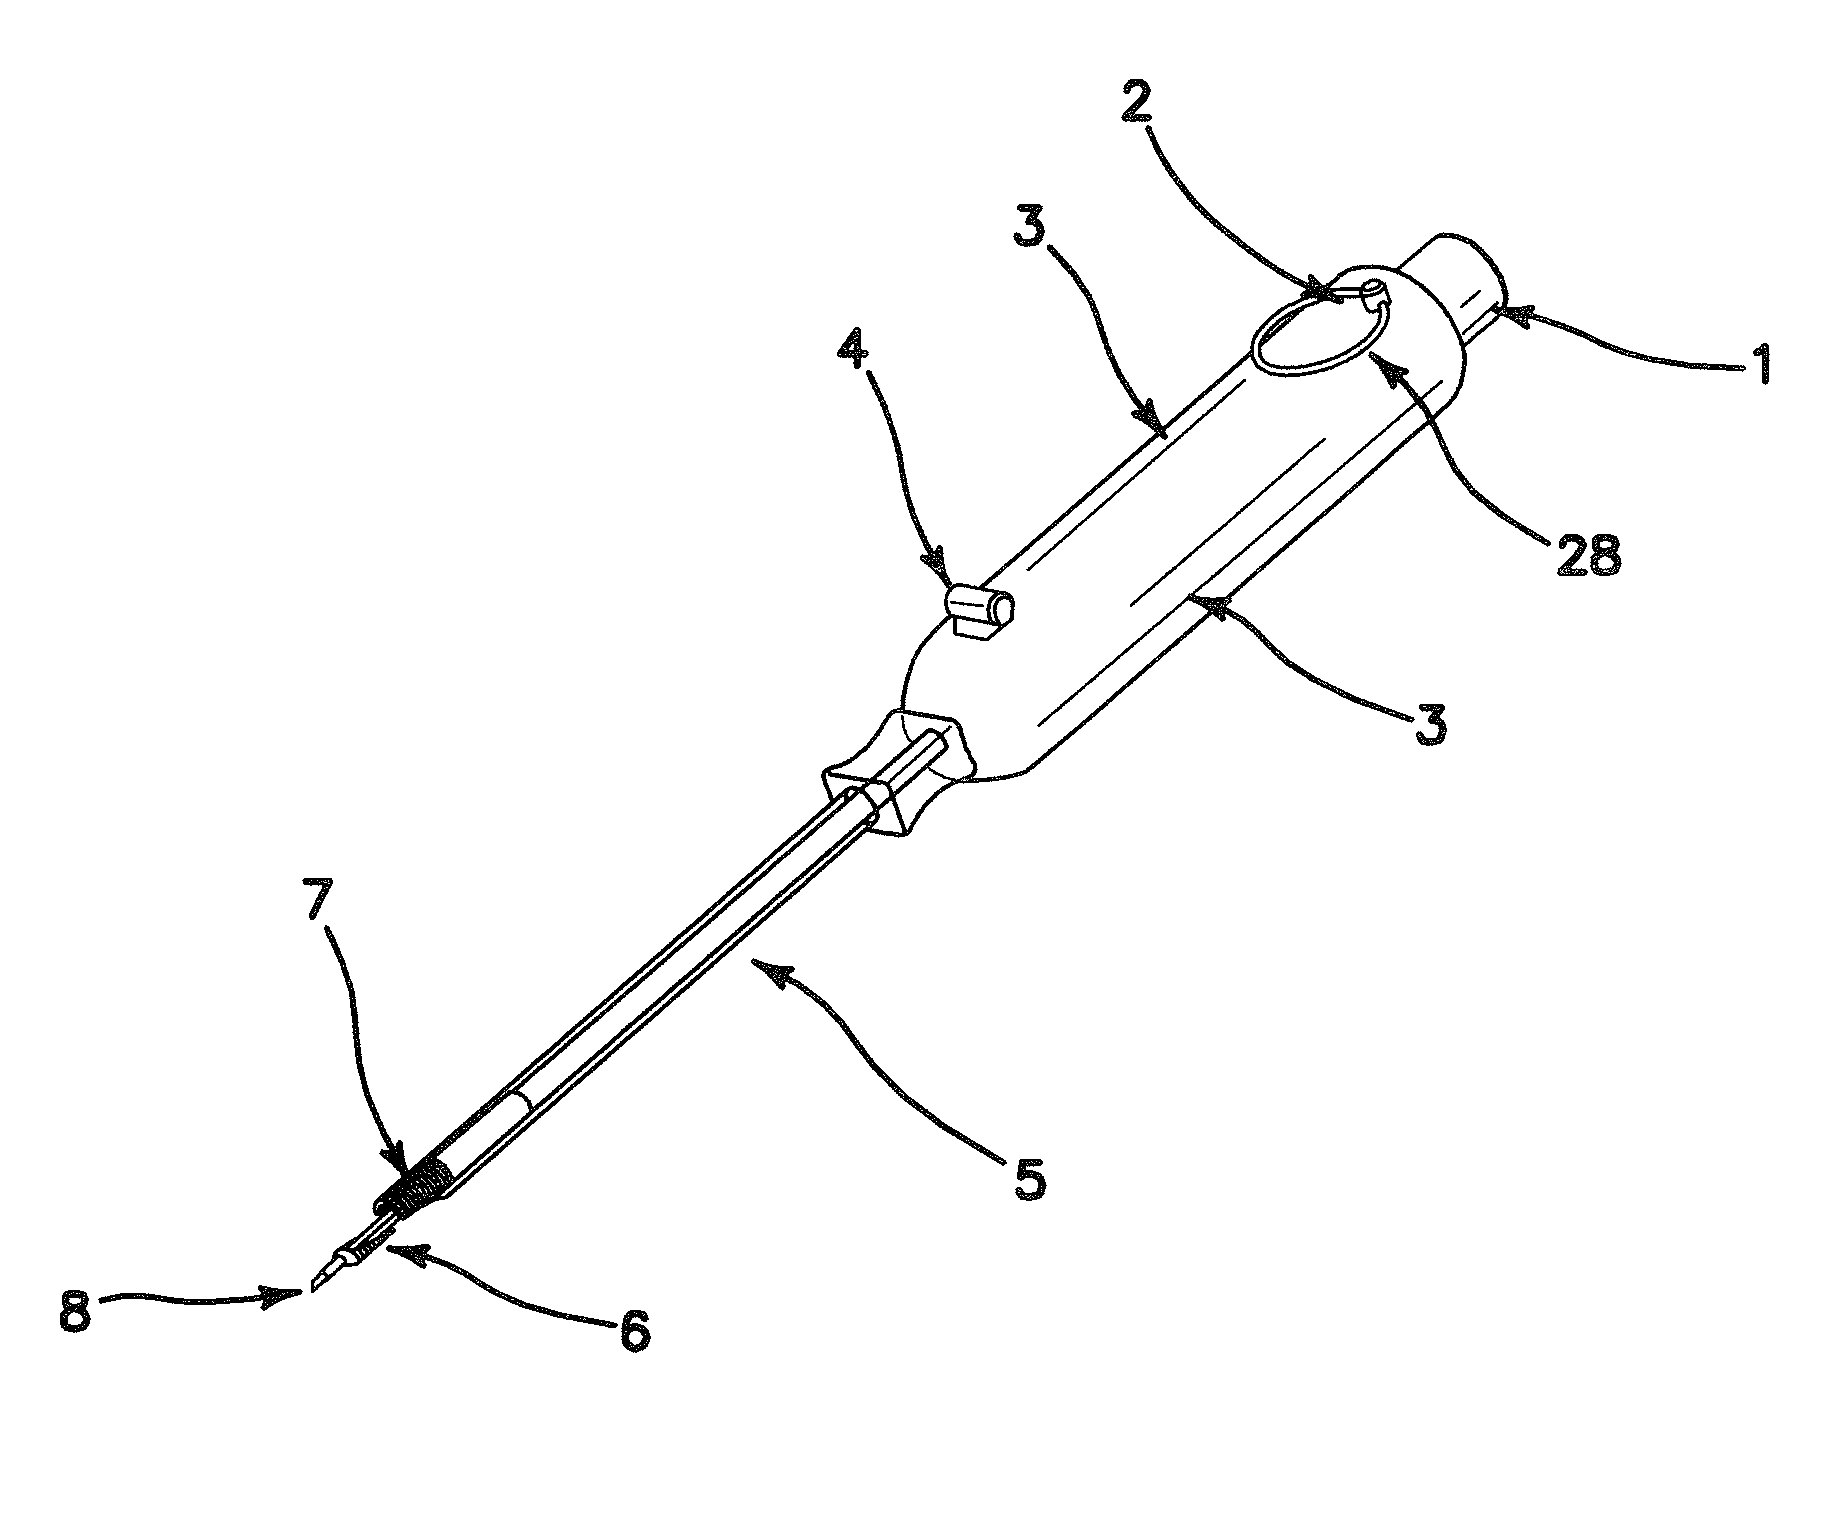 Tenodesis implant and inserter and methods for using same